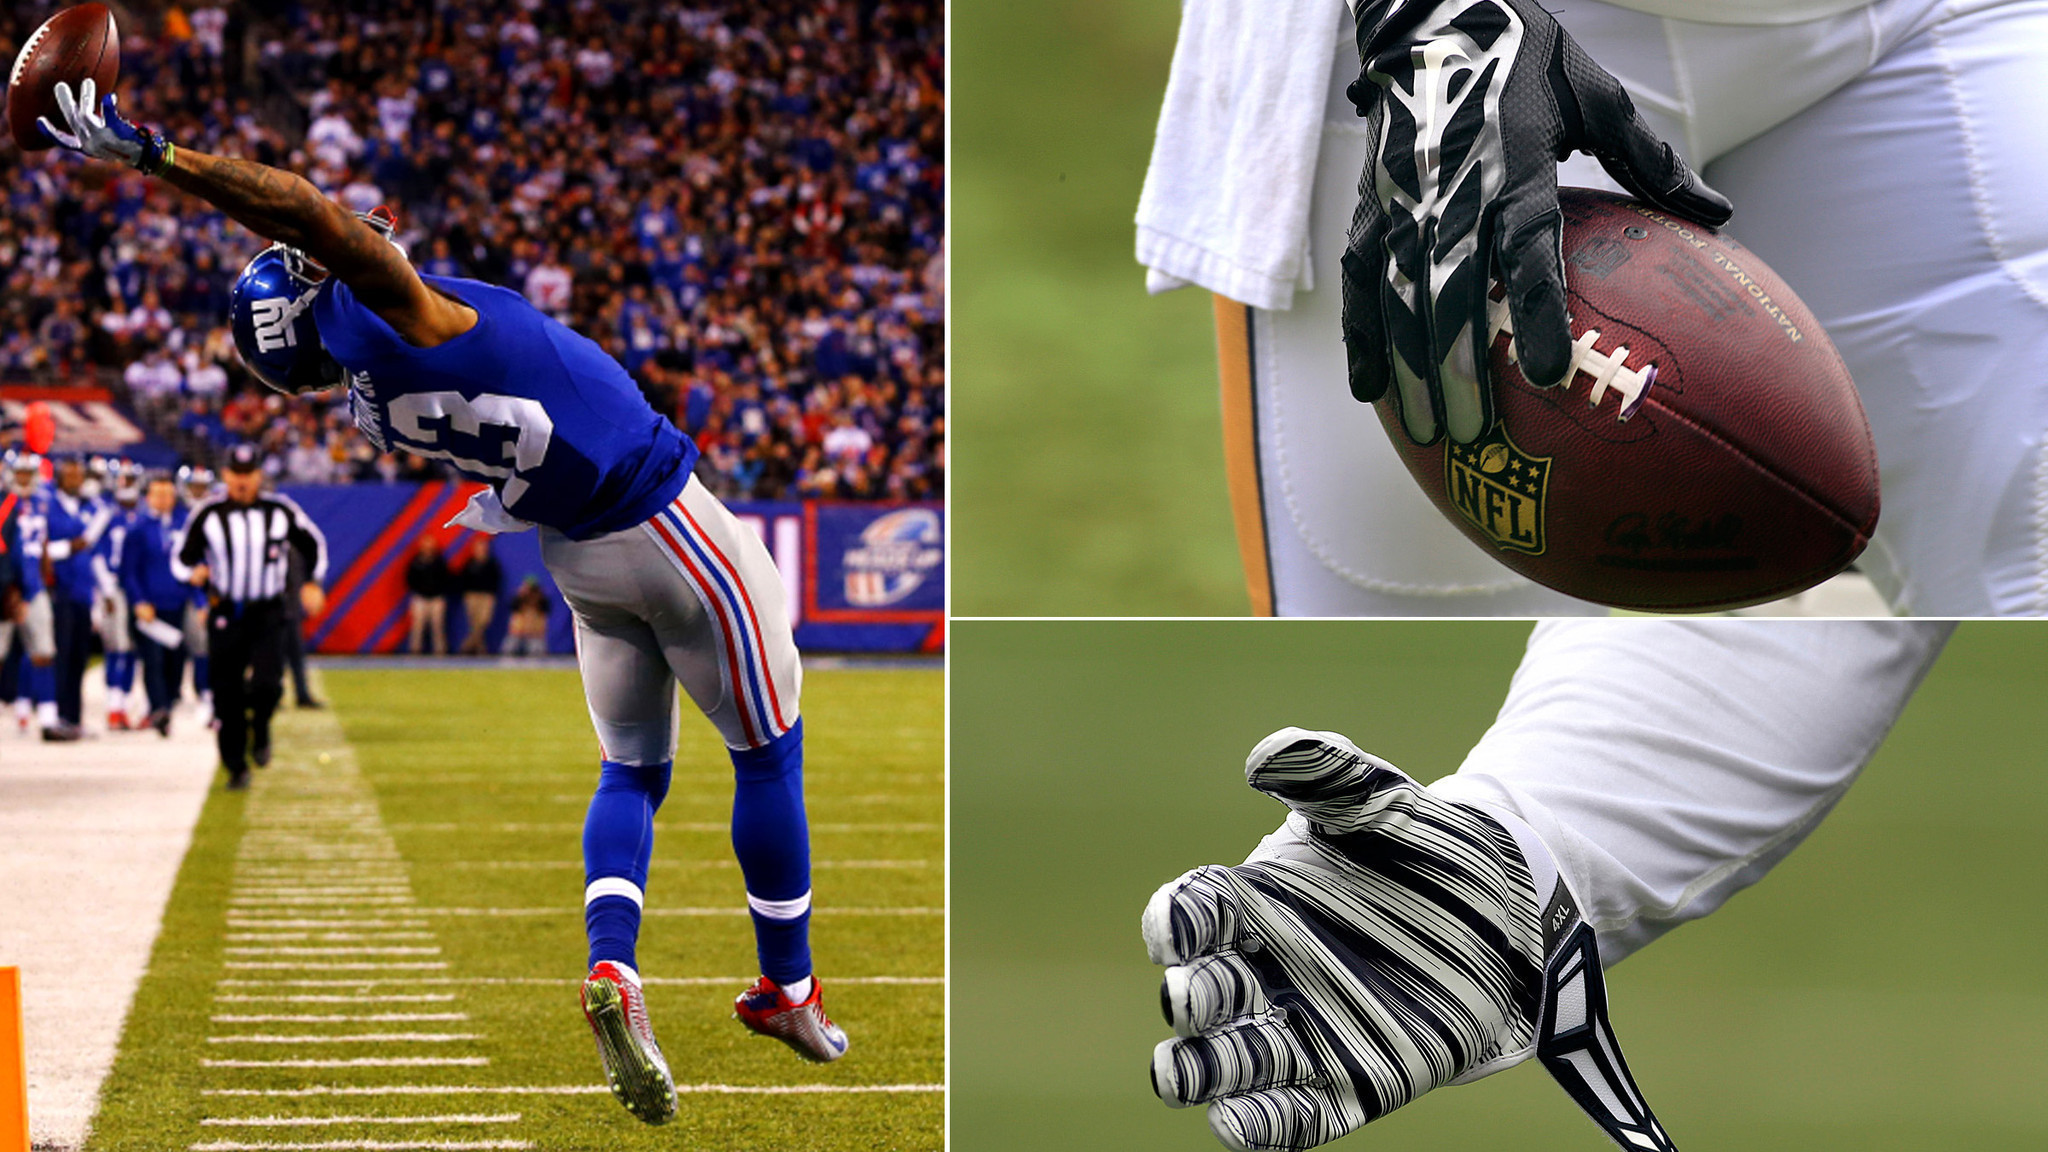 2048x1152 Gloves in NFL have gained popularity but use is largely unregulated - LA  Times